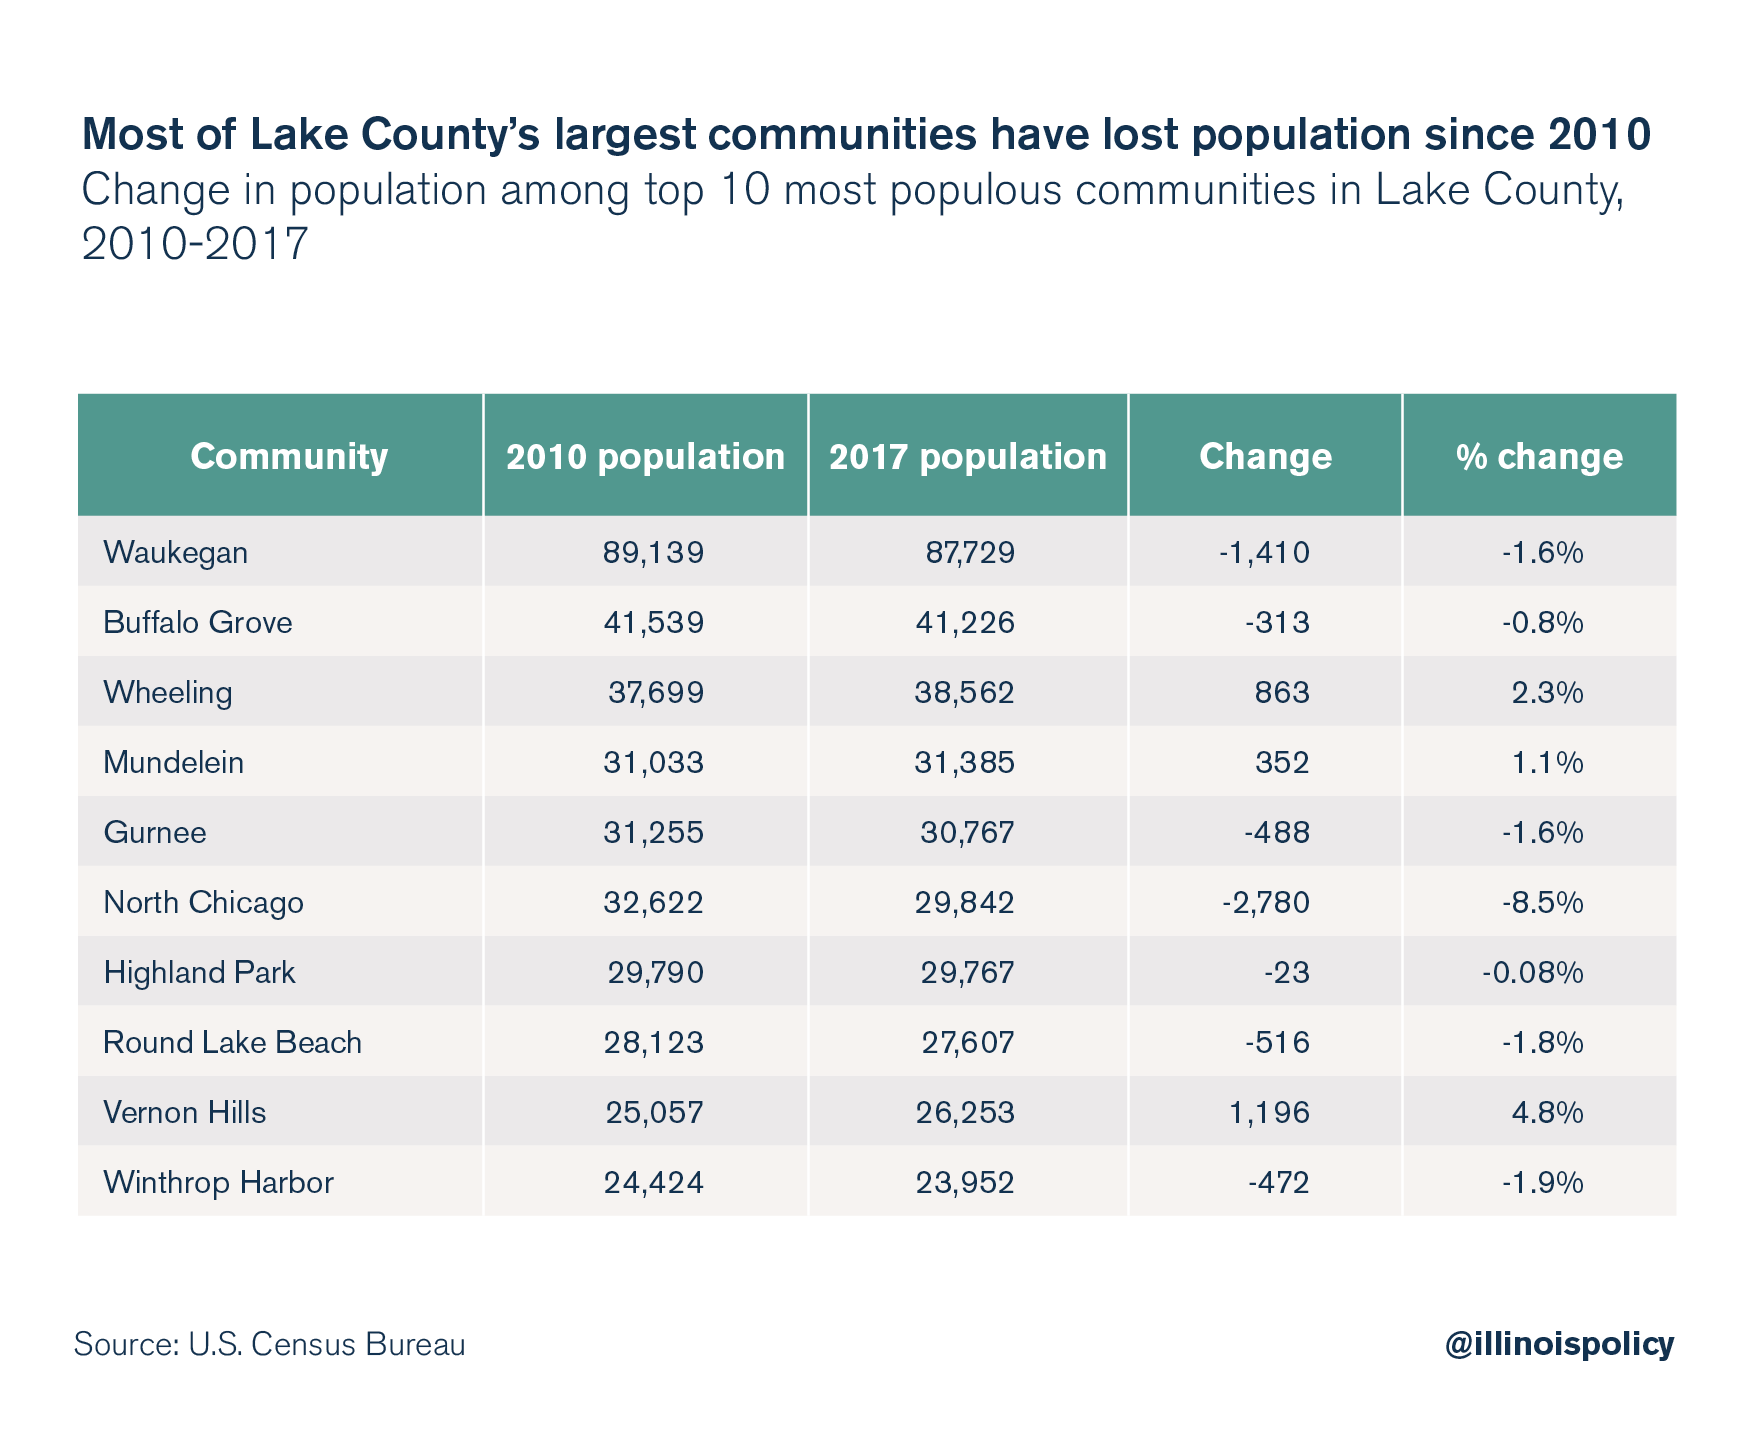 Most of Lake County's largest communities have lost population since 2010